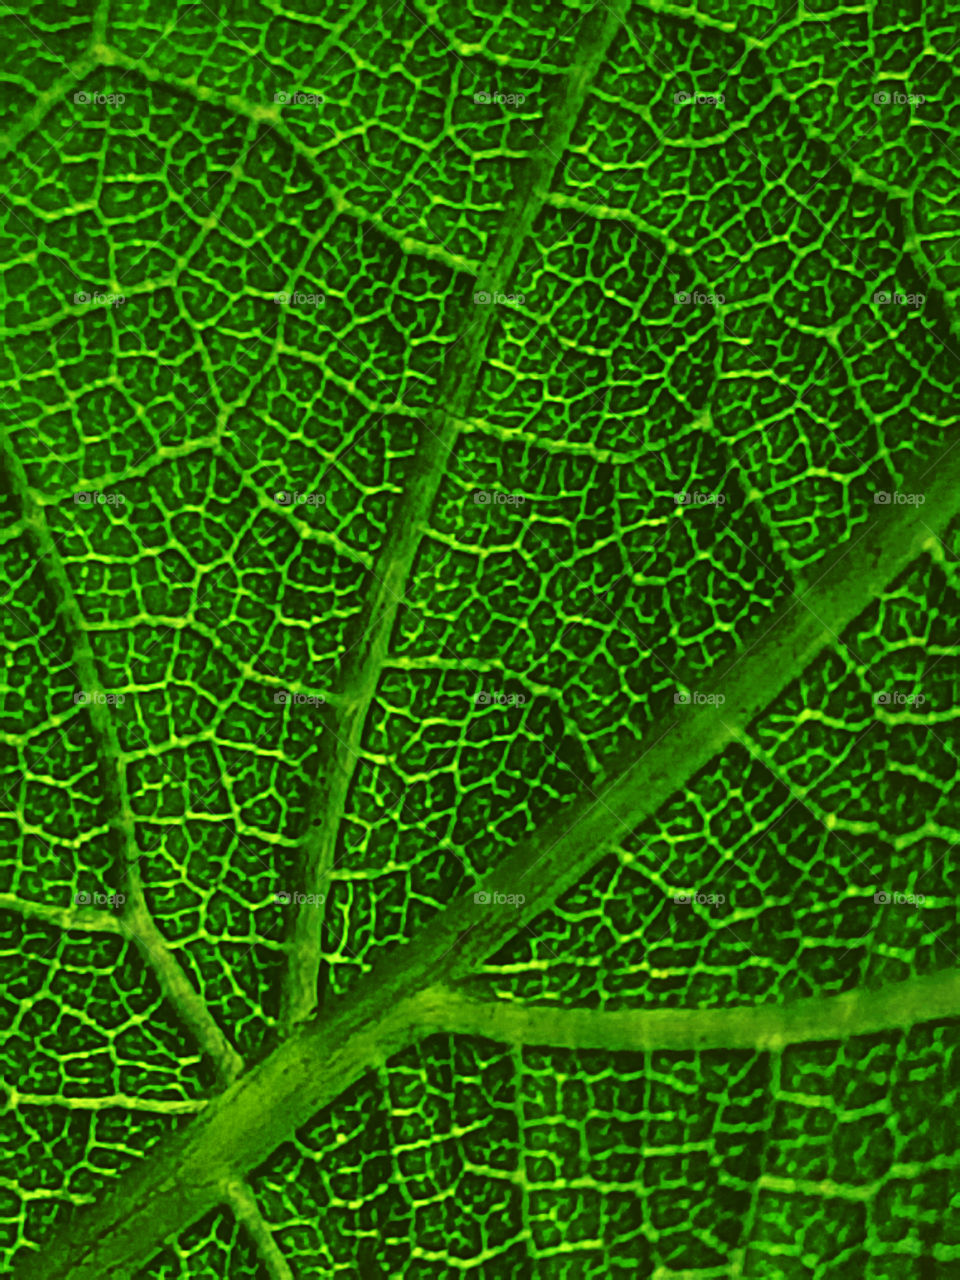 Extreme close-up of green leaf